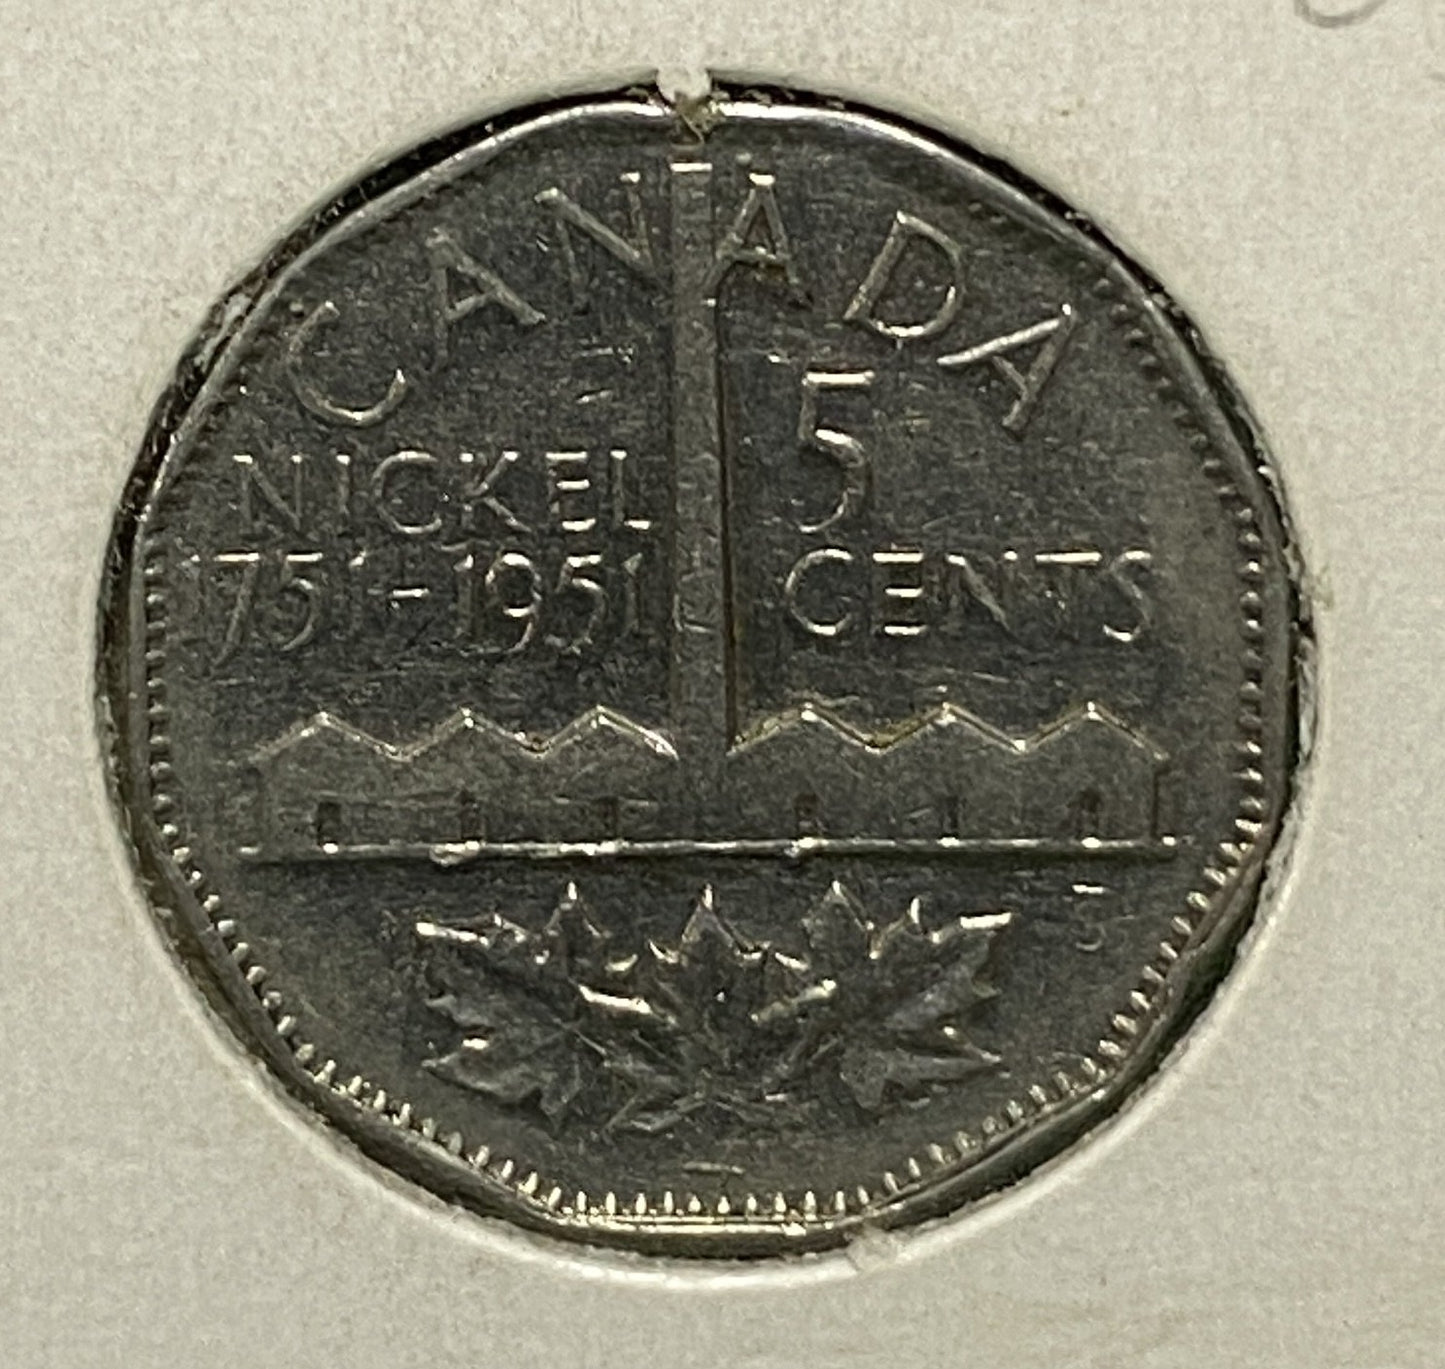 CANADIAN 1951 COMMEMORATIVE NICKEL 5 CENTS COIN GEORGE VI (F+/VF)